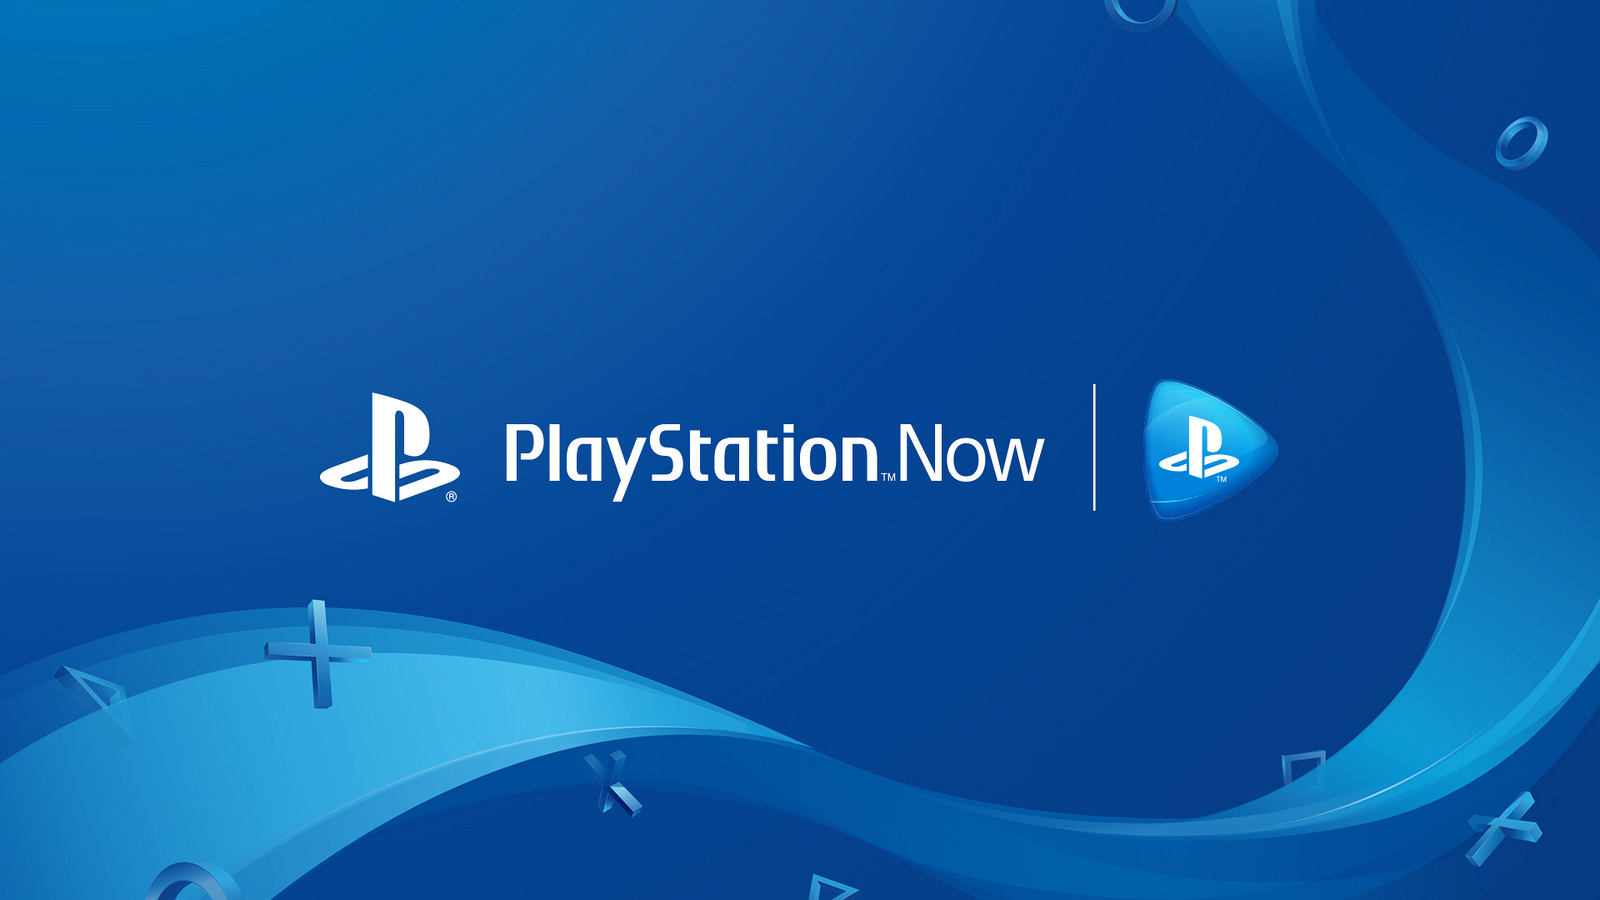 How to download game after buying it playstation store download